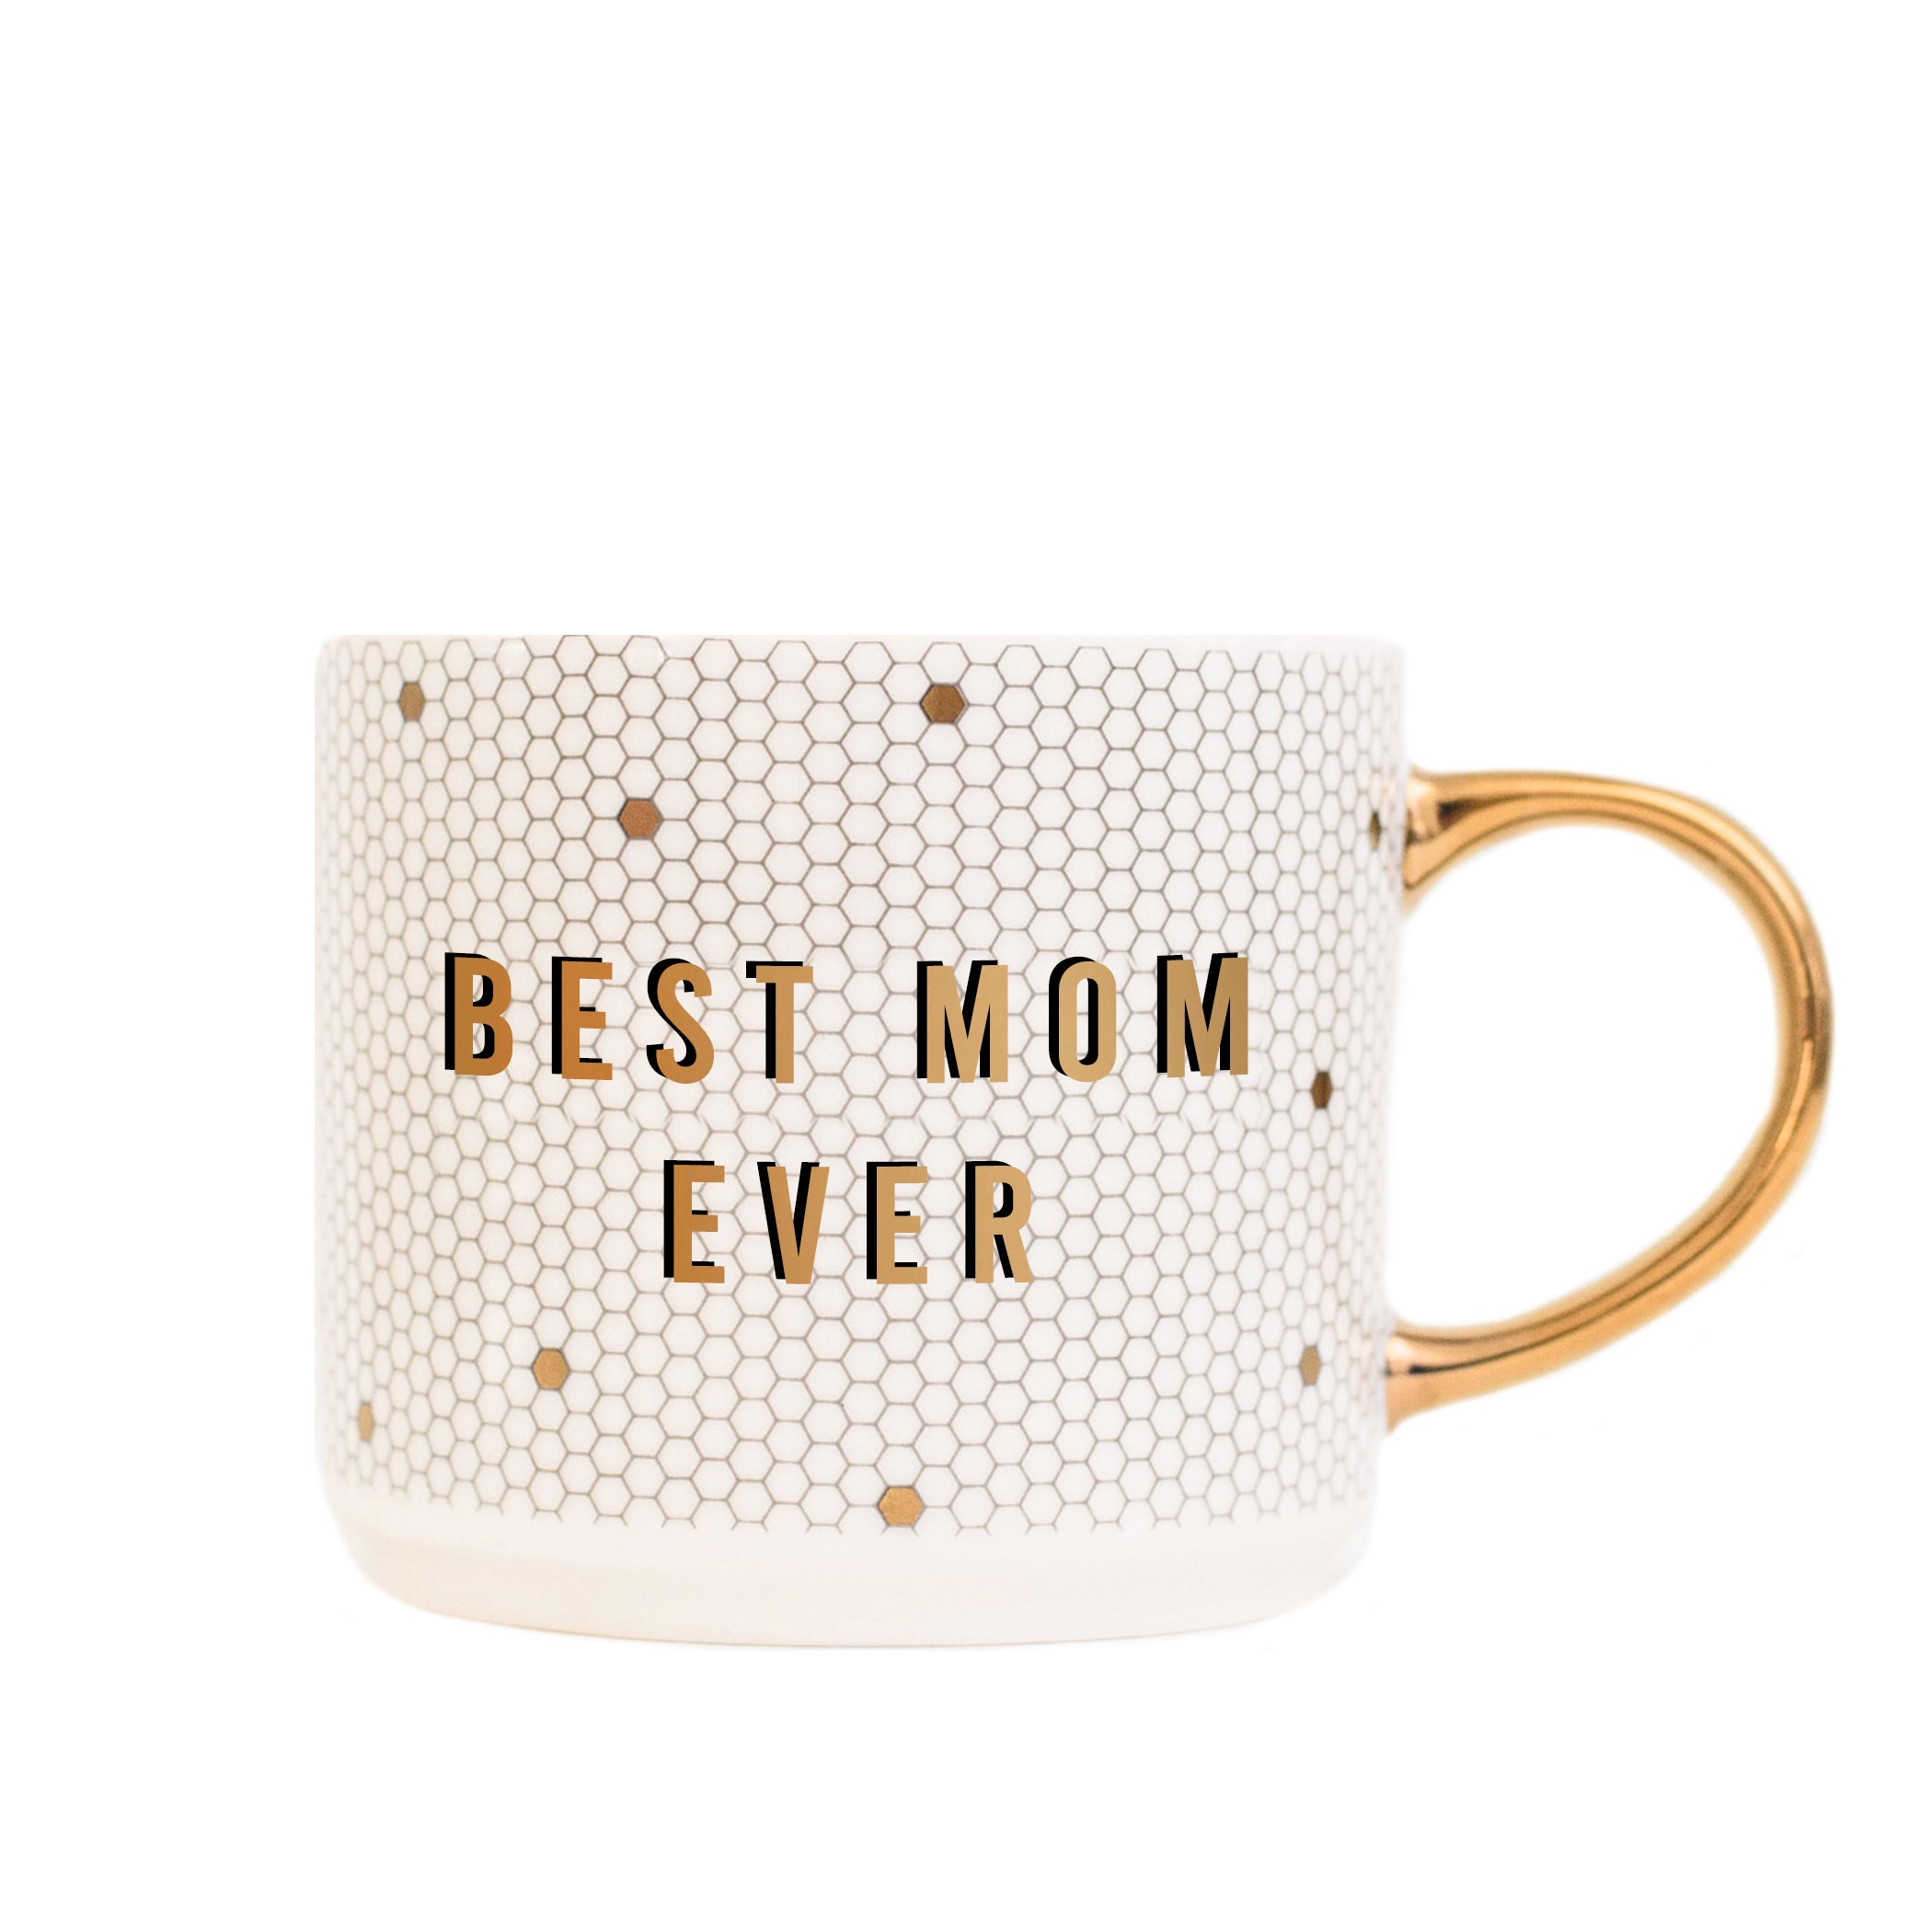 Save 15% + Free Shipping with code BESTMOM